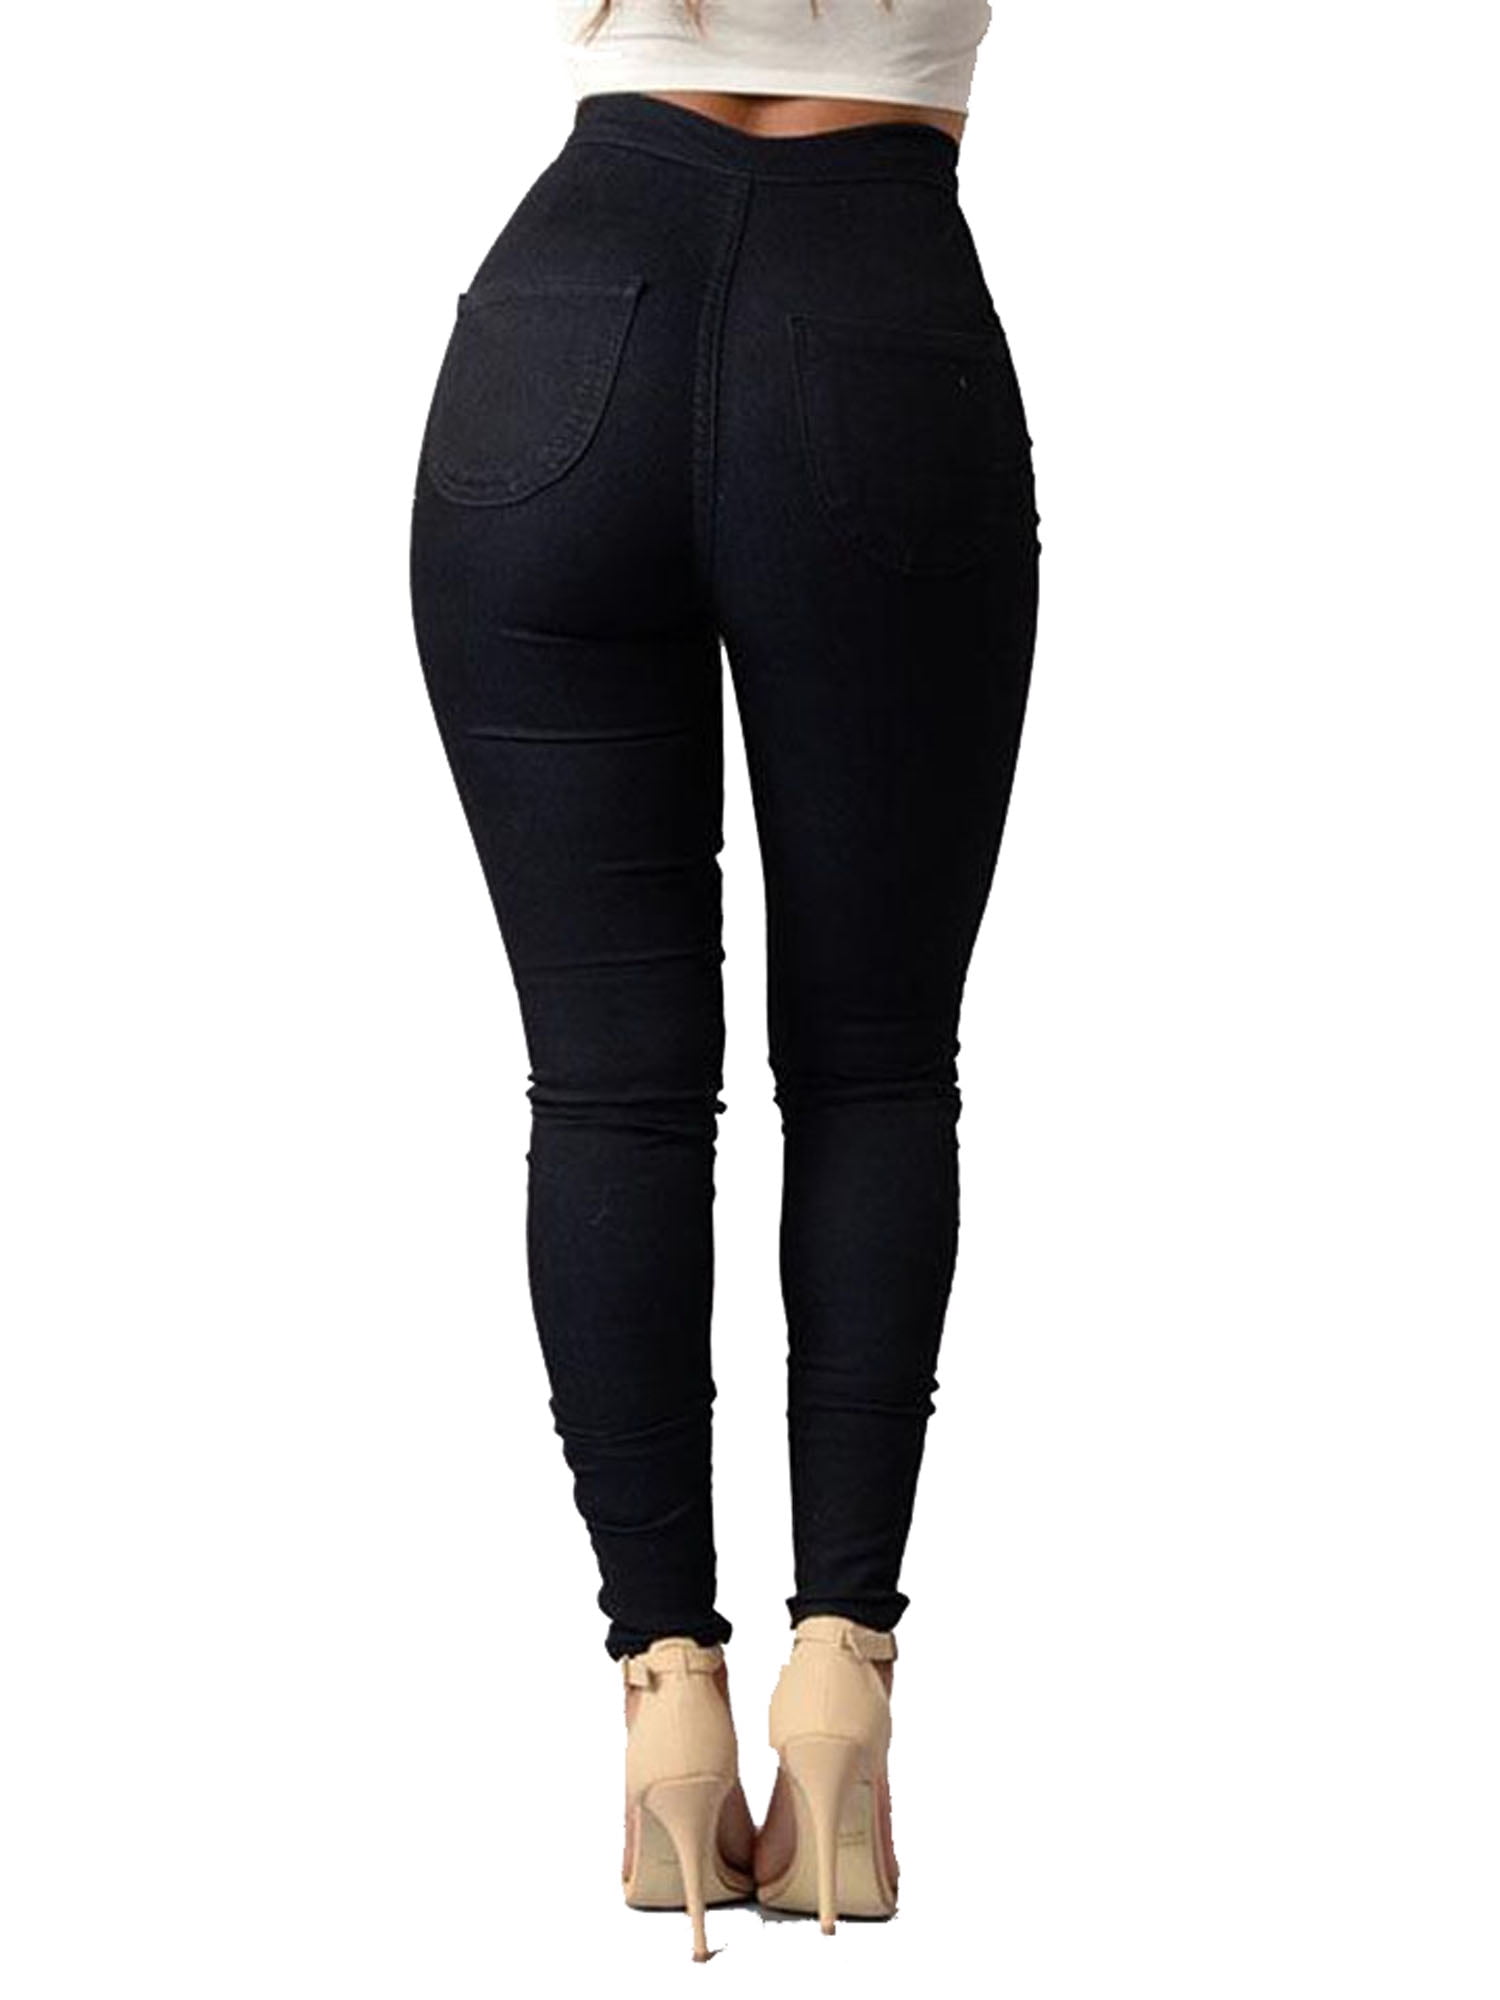 30 Casual Ladies Pencil Fit Jeans at Rs 350/piece in Ghaziabad | ID:  14713027930